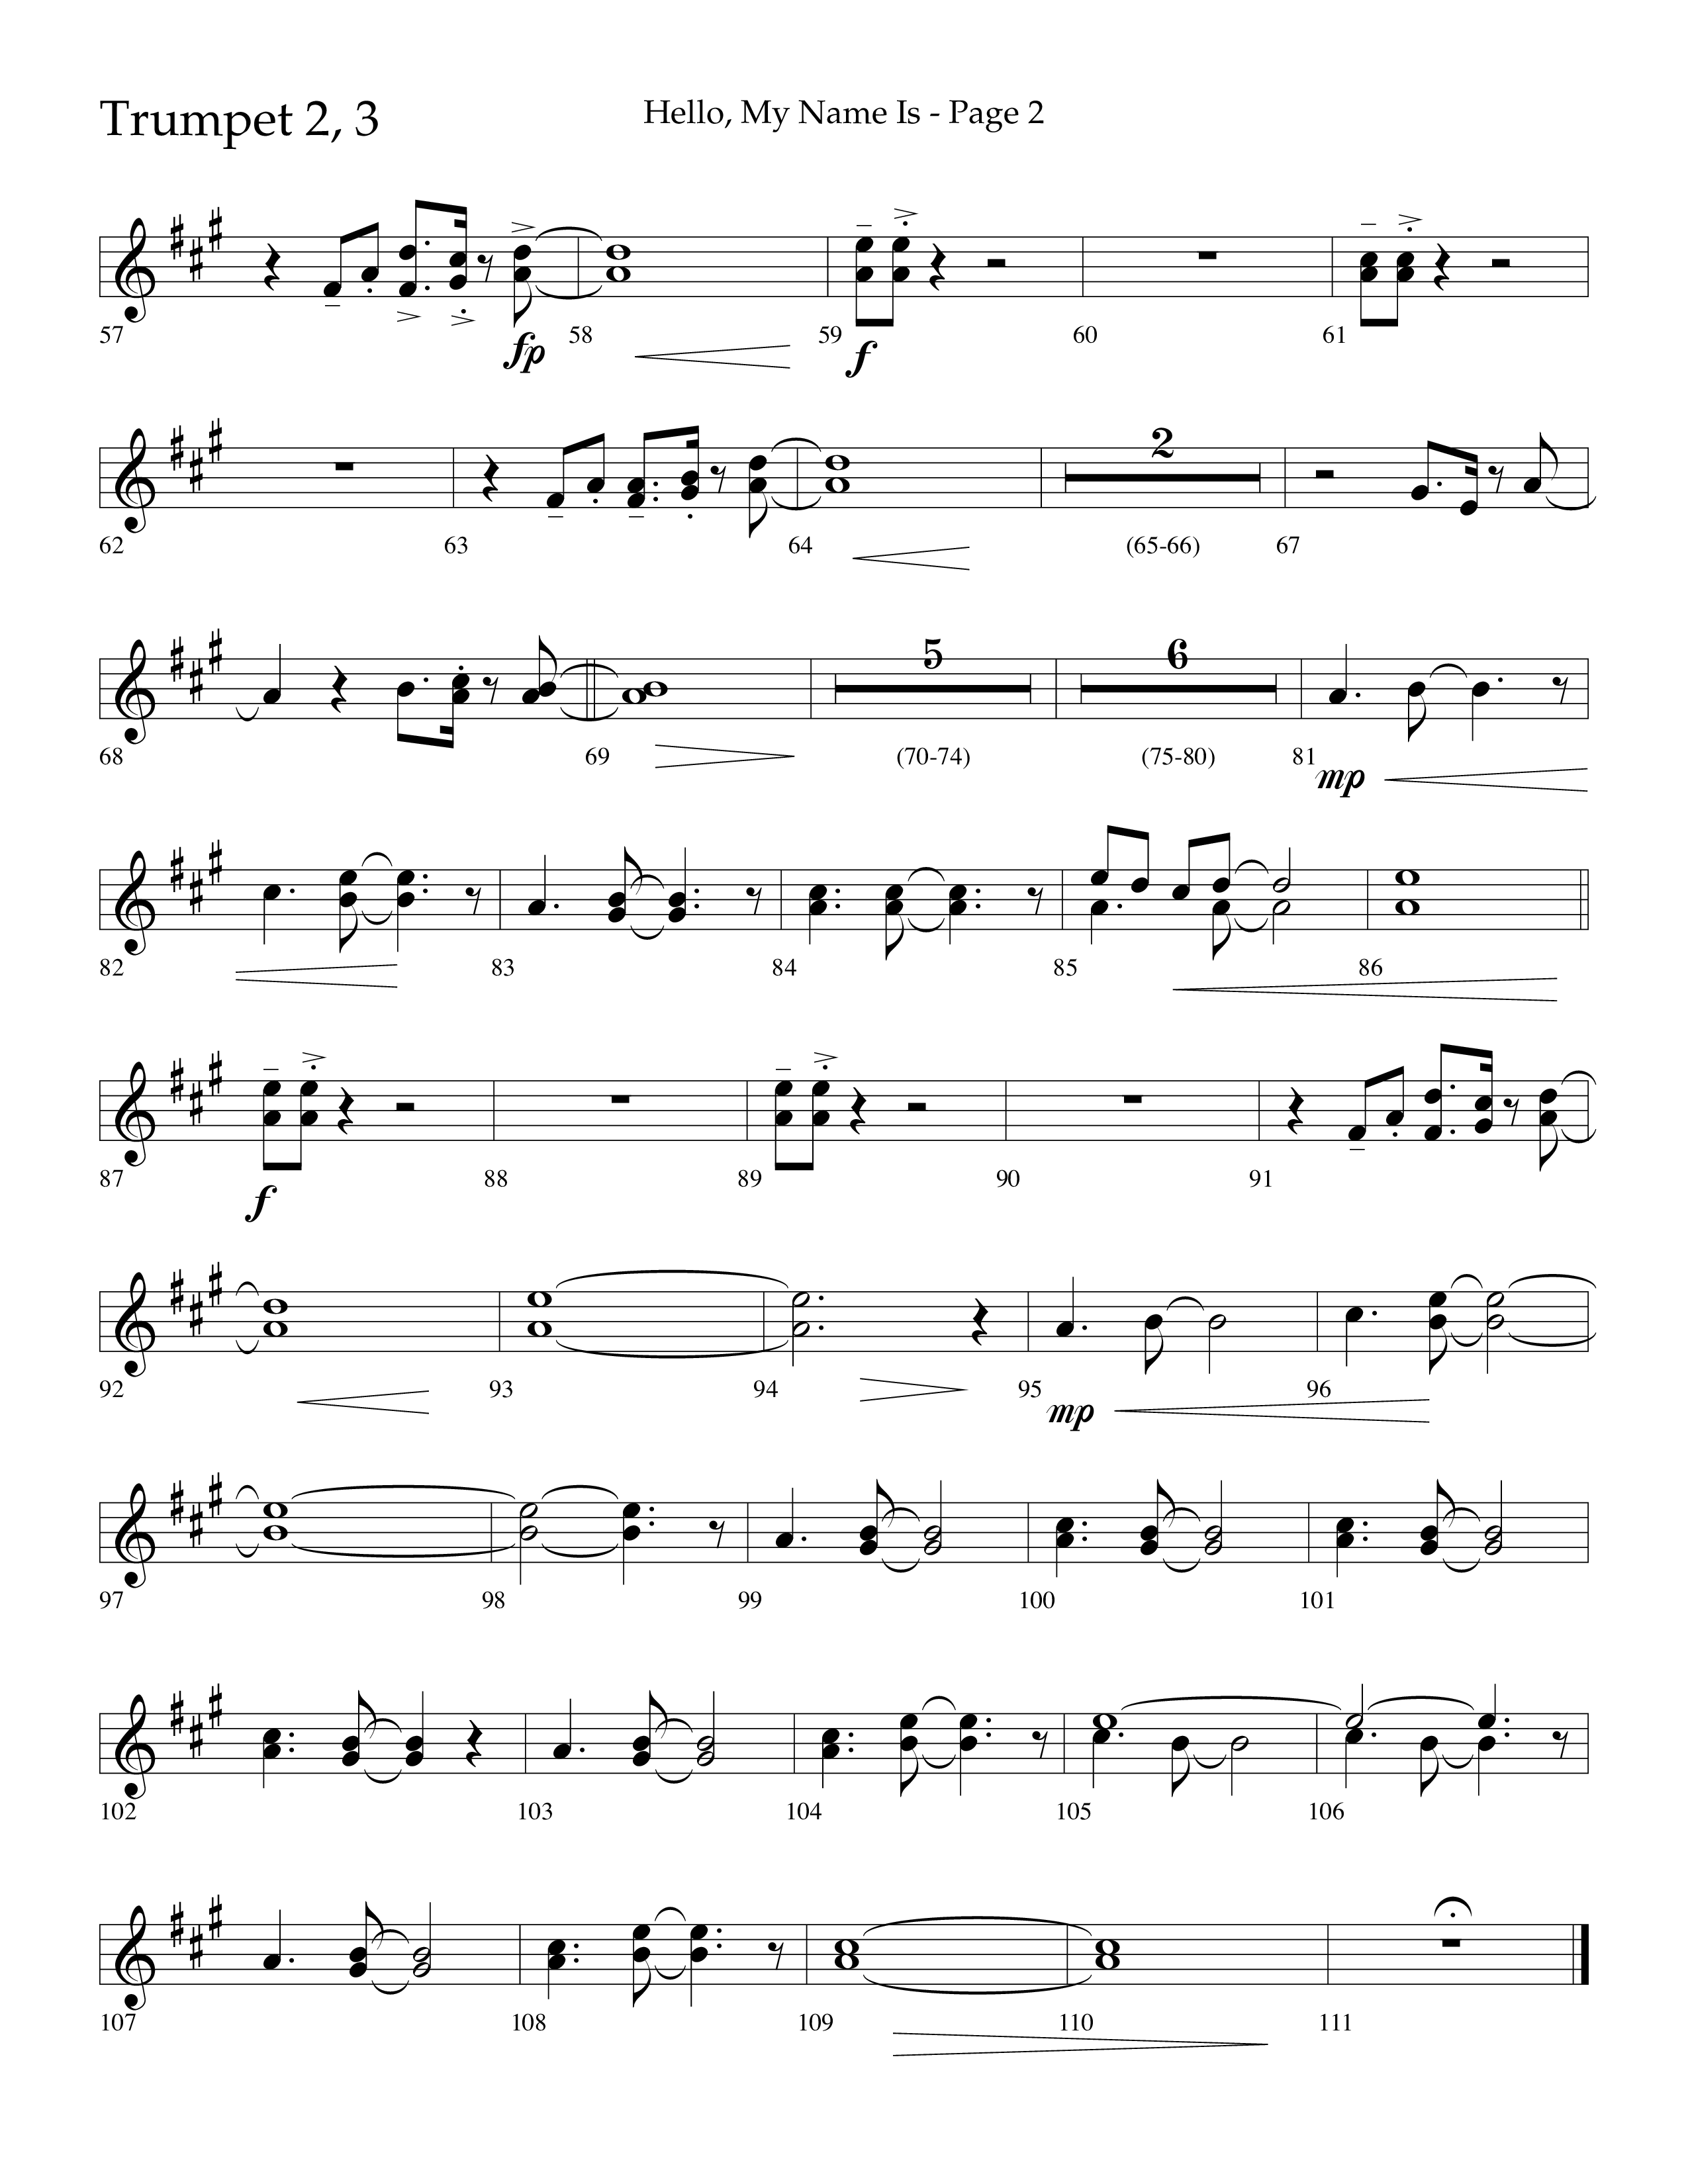 Hello My Name Is (Choral Anthem SATB) Trumpet 2/3 (Lifeway Choral / Arr. Jim Hammerly)